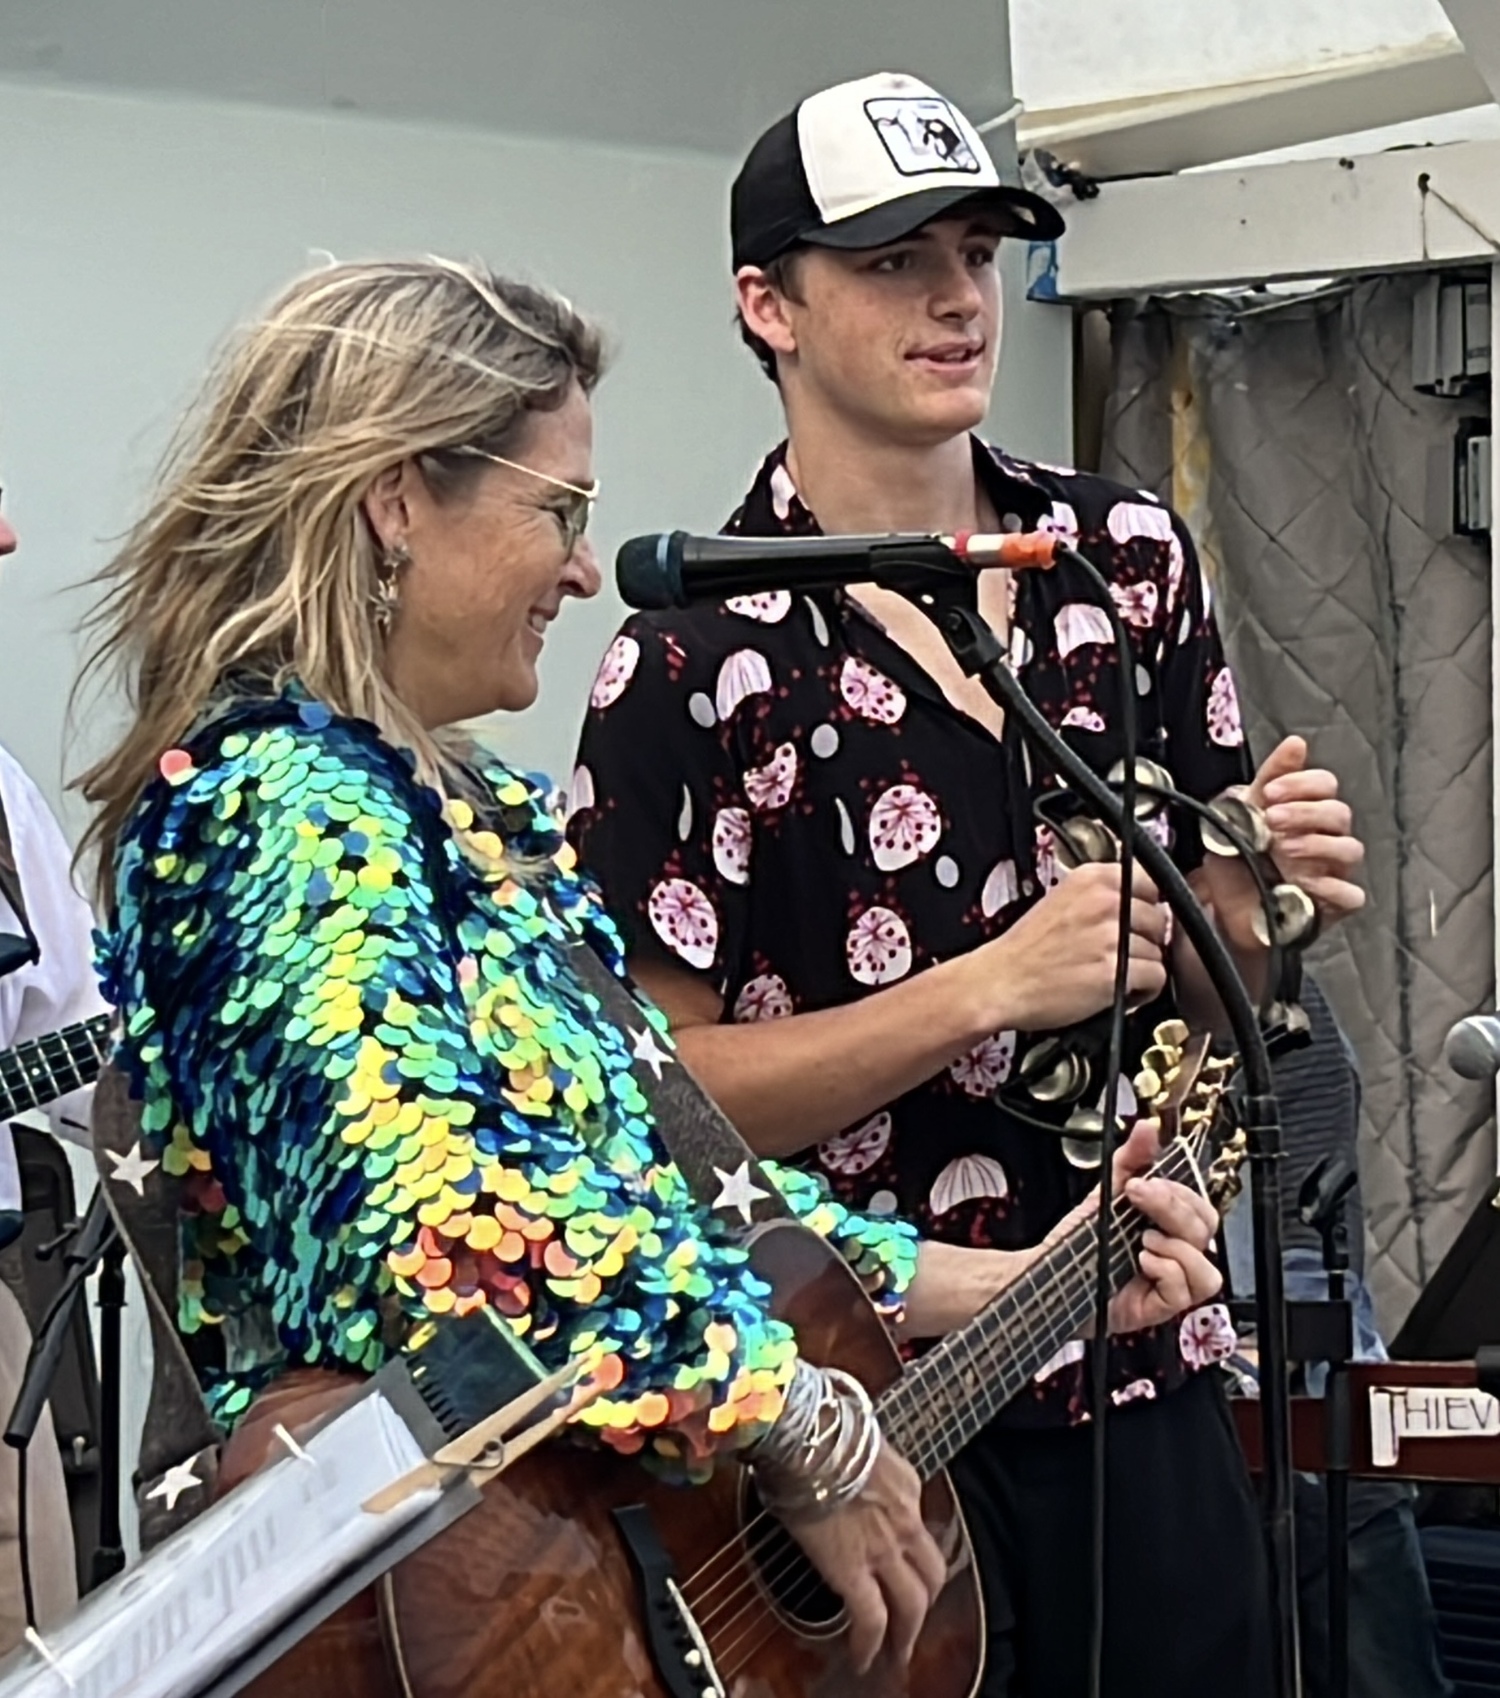 Nancy Atlas on stage at The Surf Lodge in Montauk with her son, Cashus Muse, who will perform with his band PasserBy at a July 22 concert in Sag Harbor. ELLEN DIOGUARDI